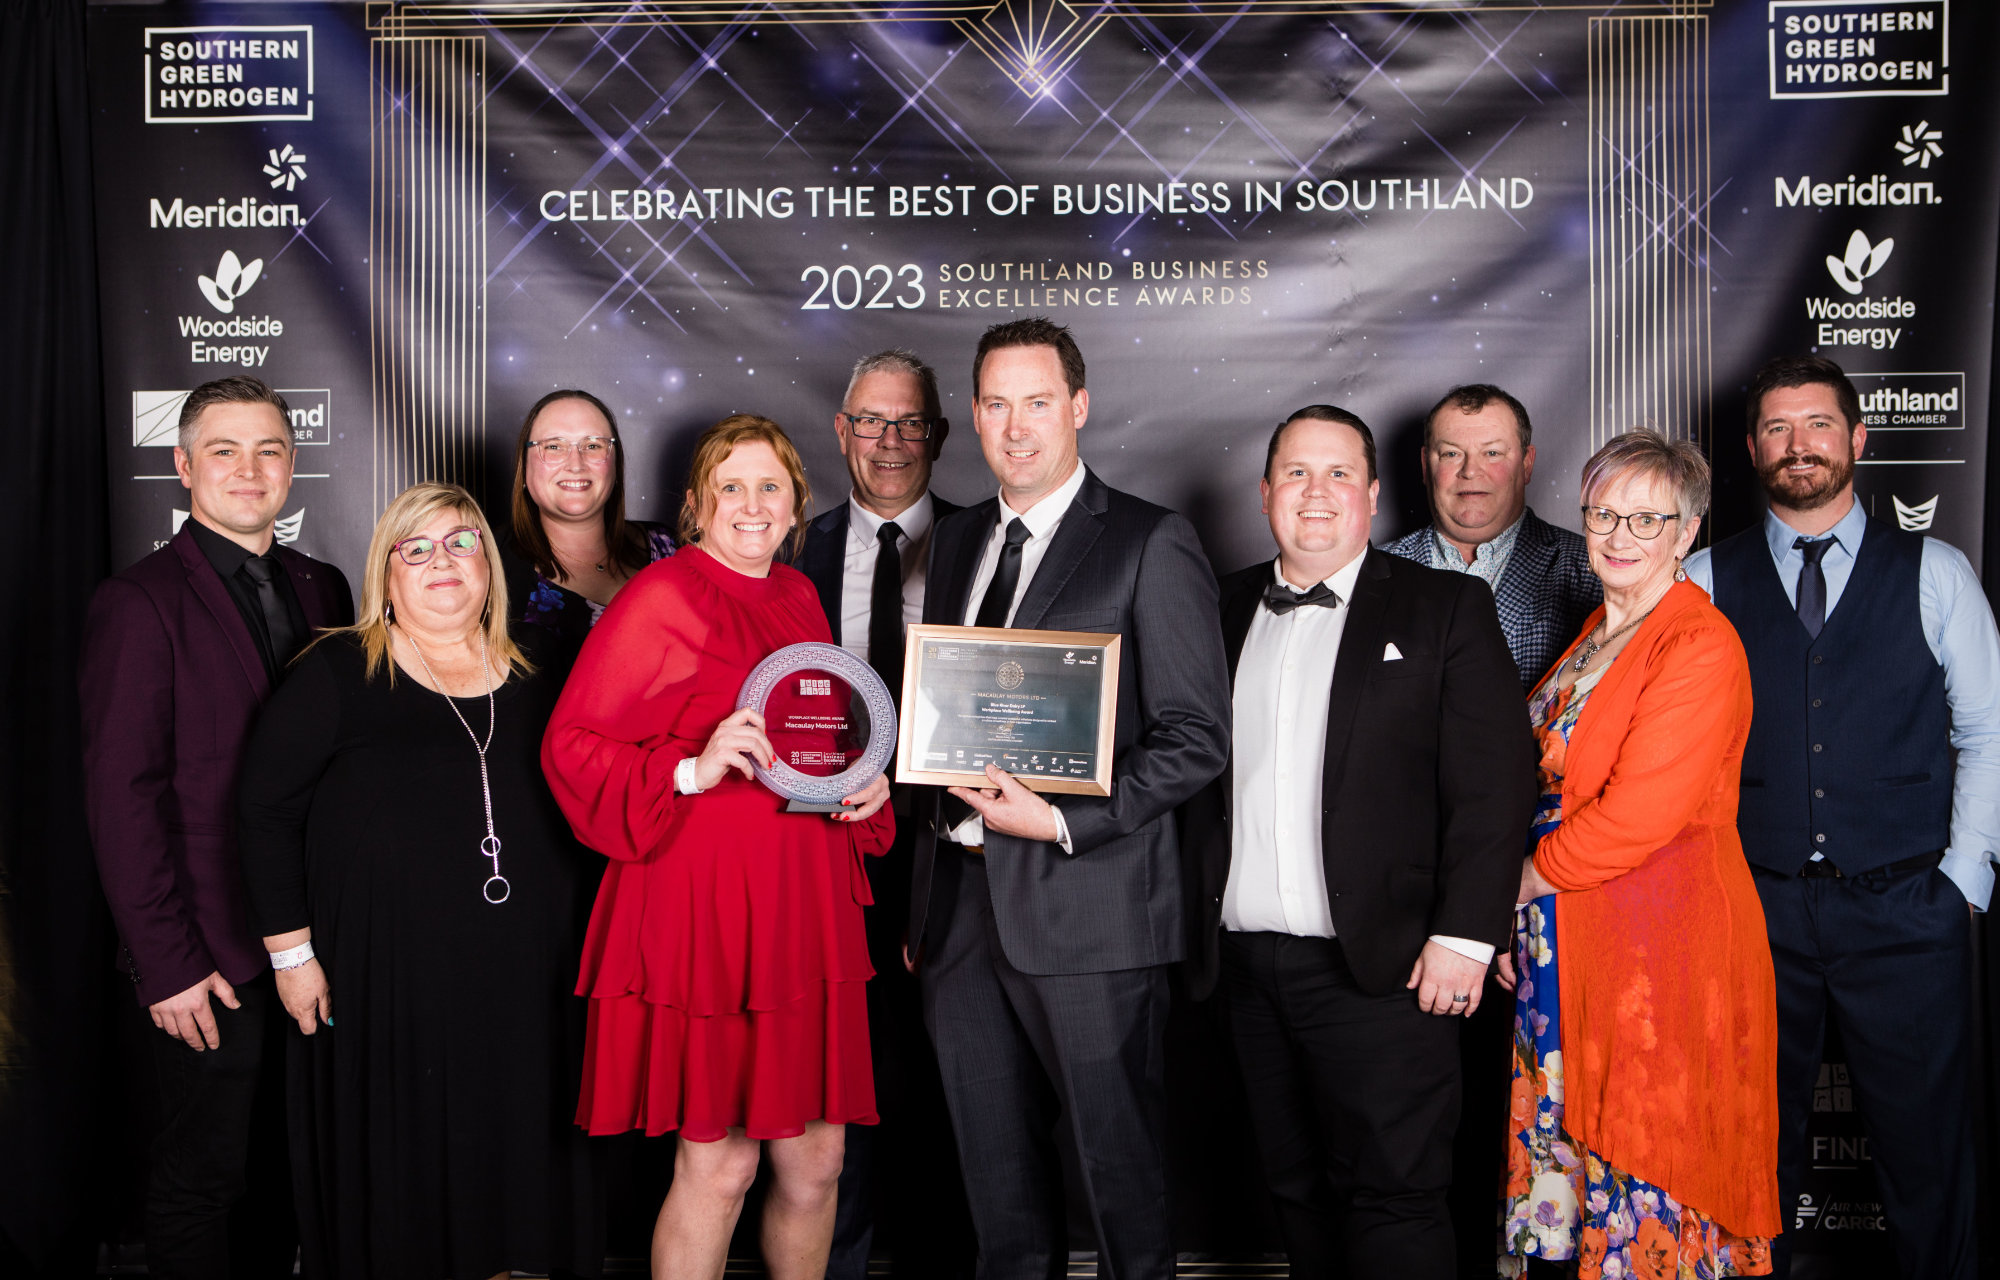 The 2023 Southern Green Hydrogen Southland Business Excellence Awards